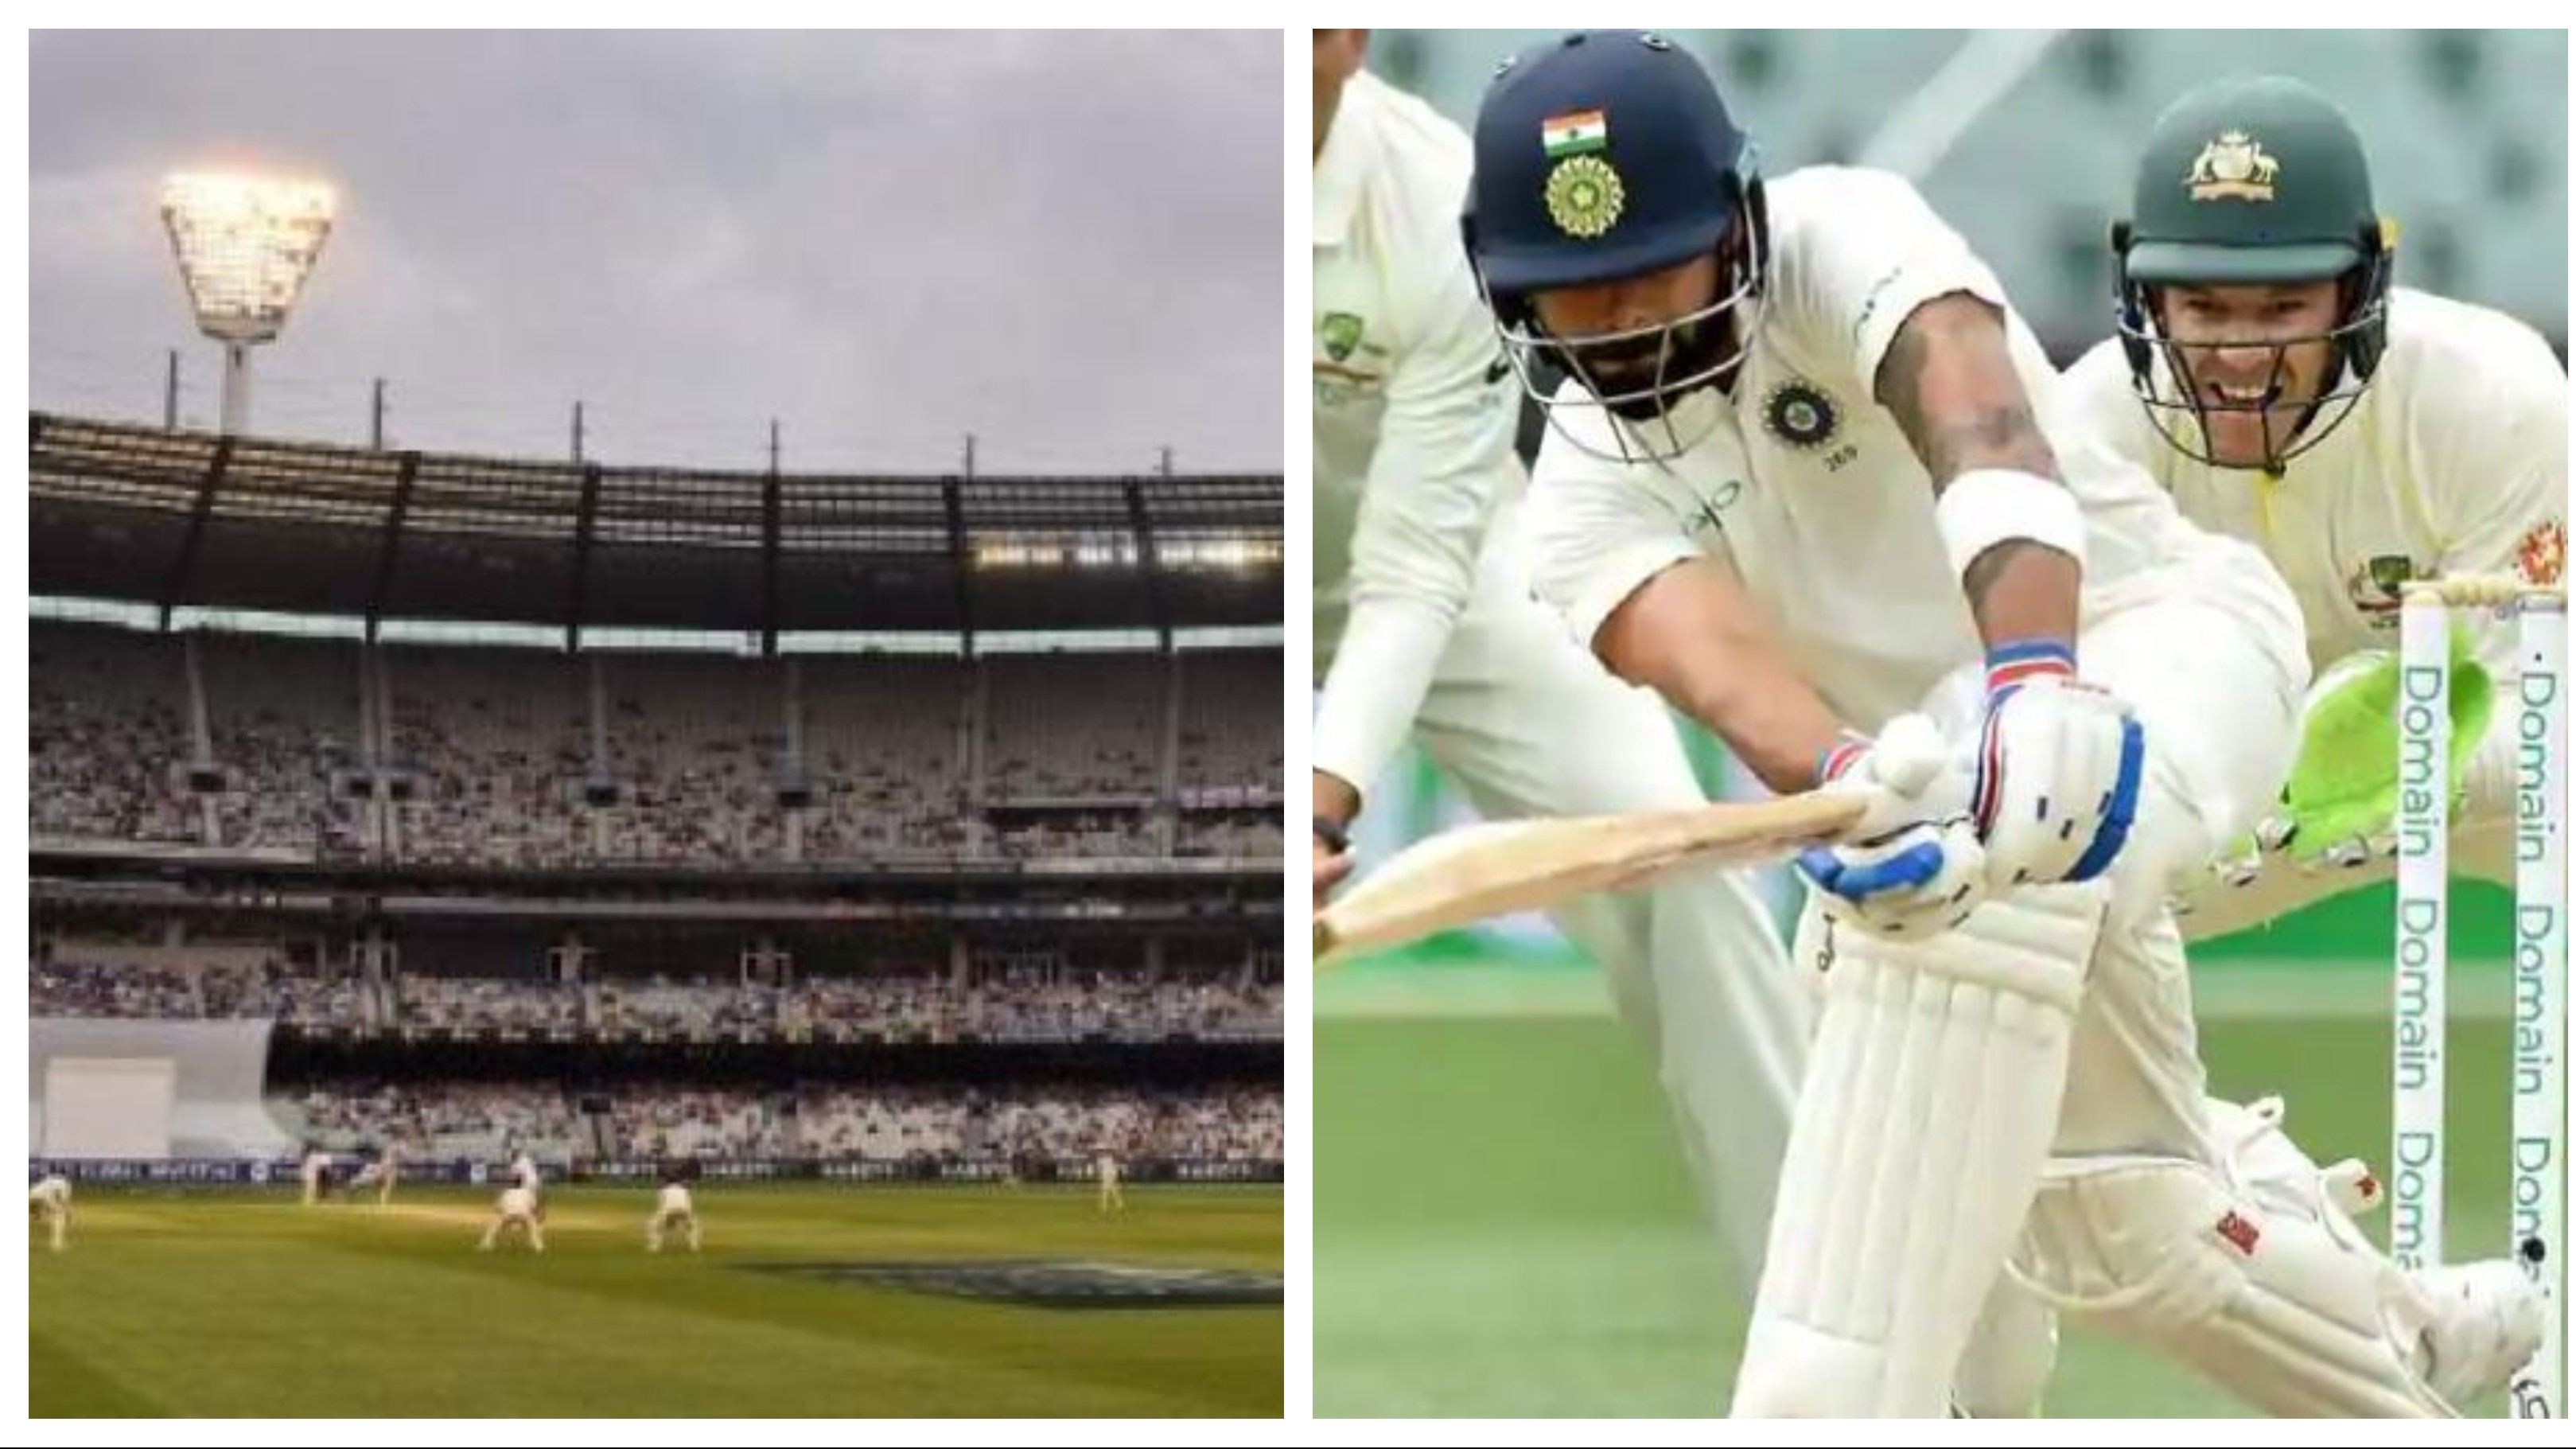 Rise in COVID-19 cases in Victoria puts MCG hosting AUS-IND Boxing Day Test in doubt 